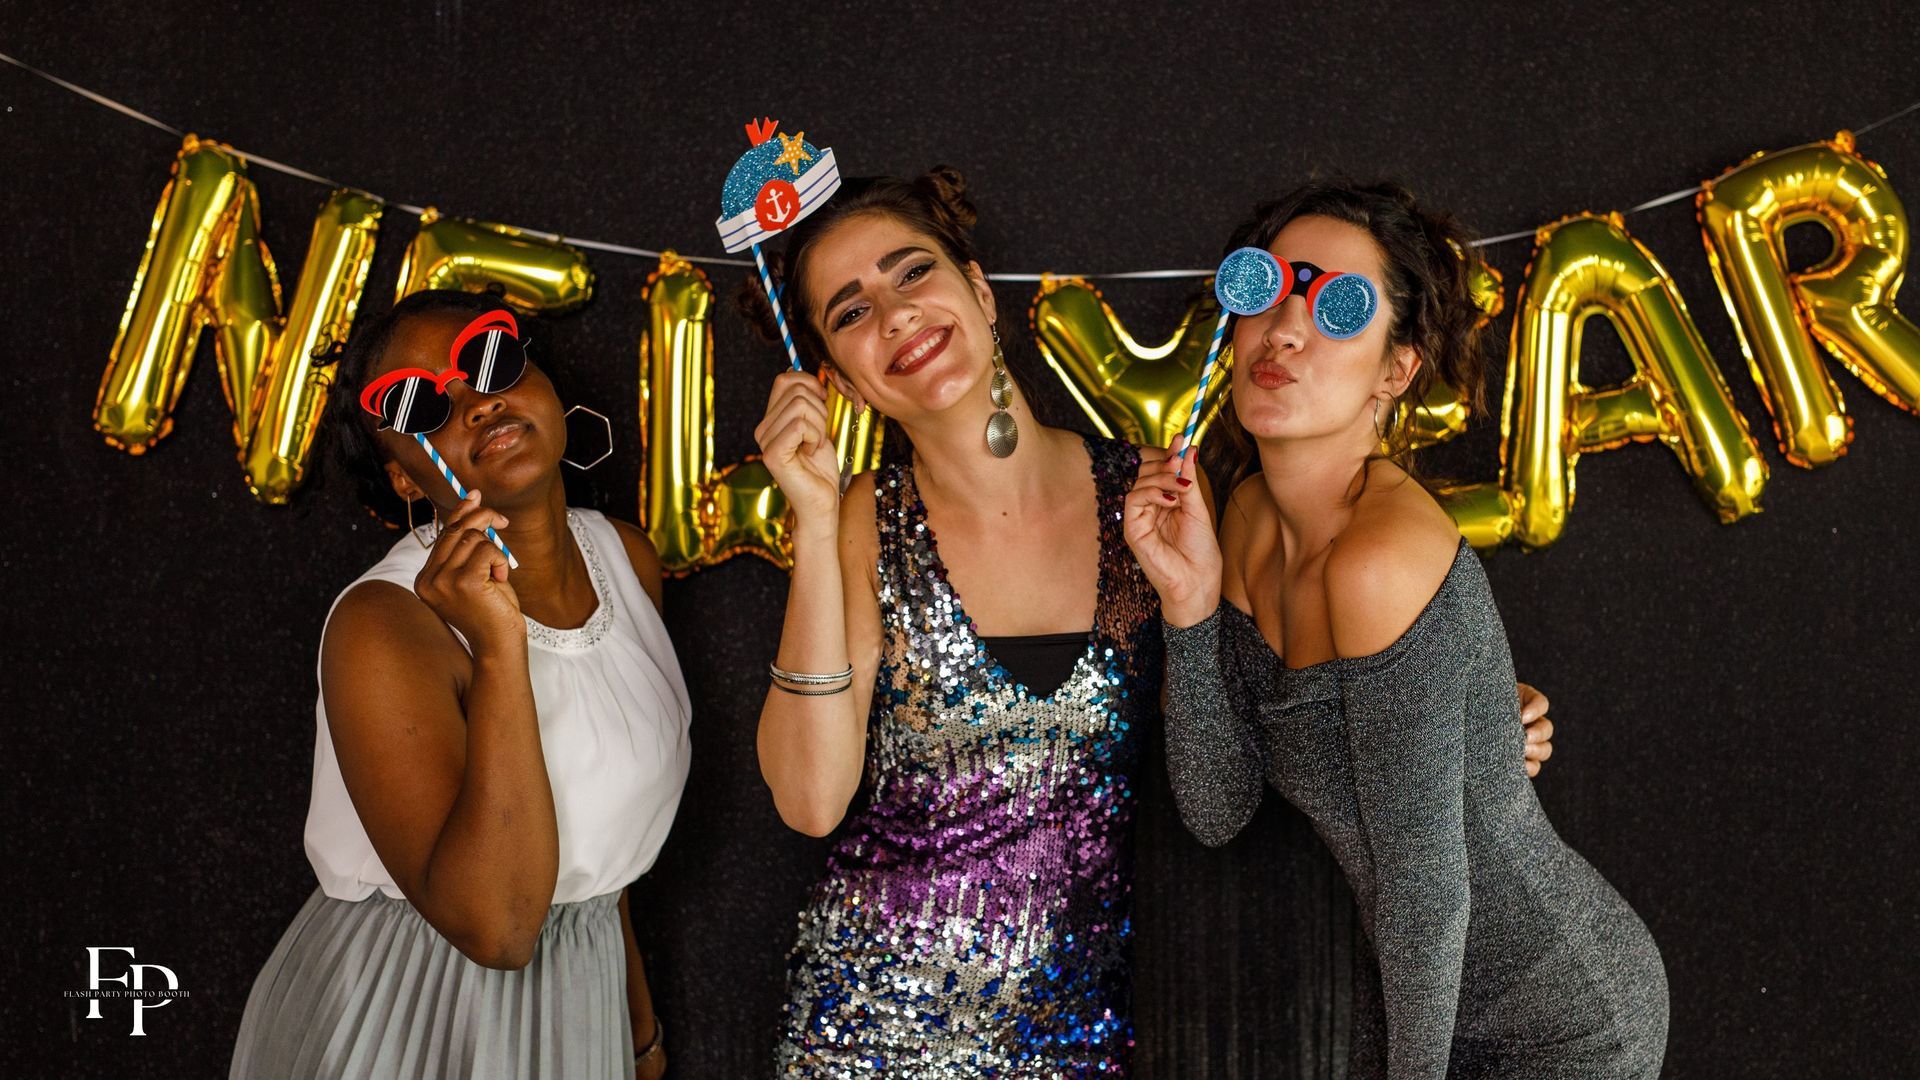 Friends pose with their props at a new year's eve party in Waco.